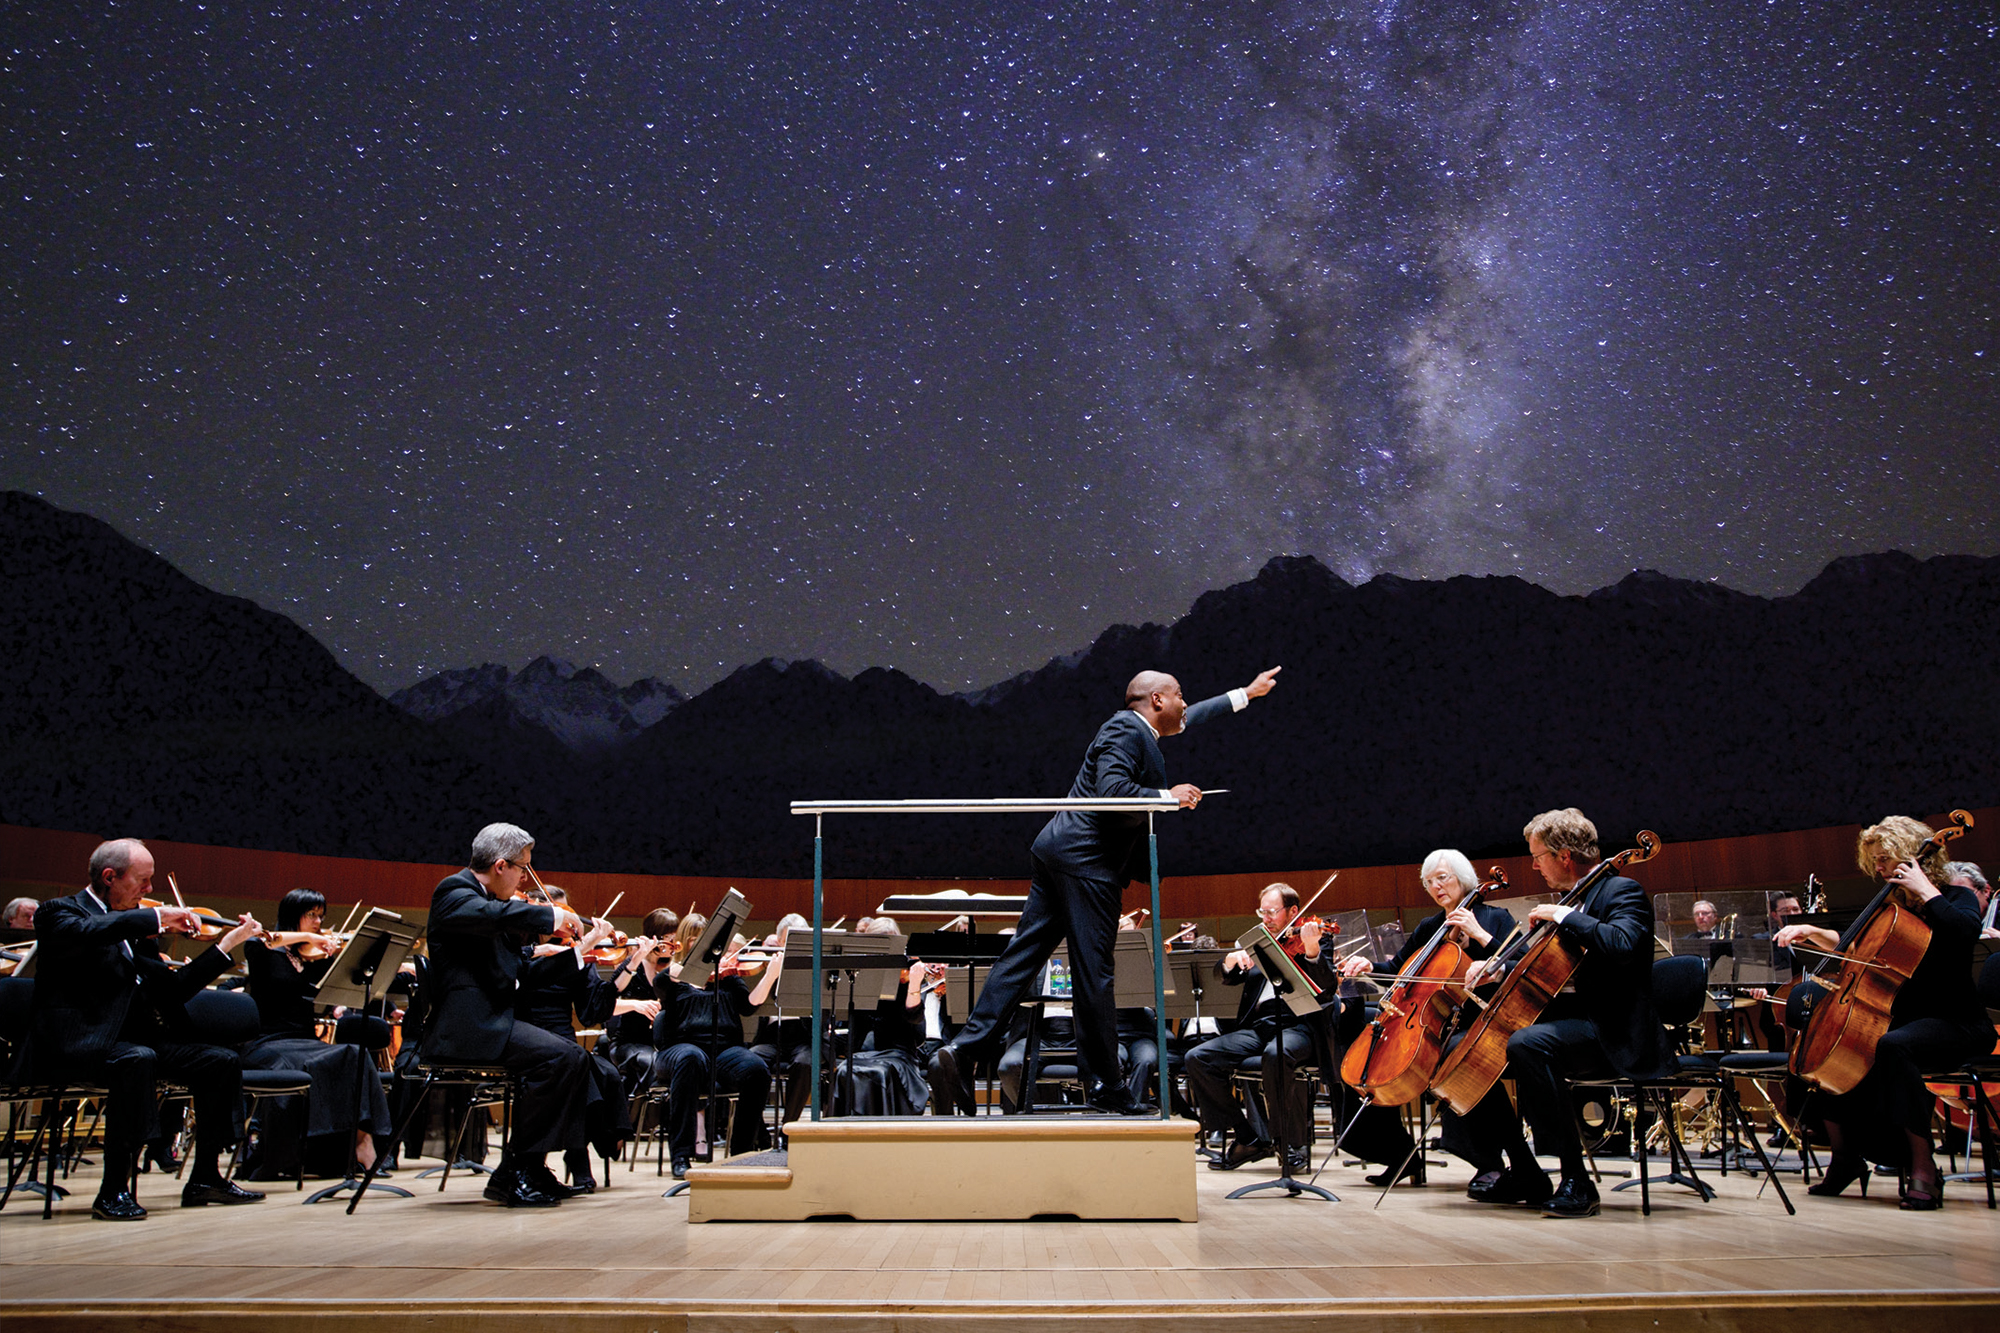 edmonton symphony orchestra playing under the stars in jasper national park